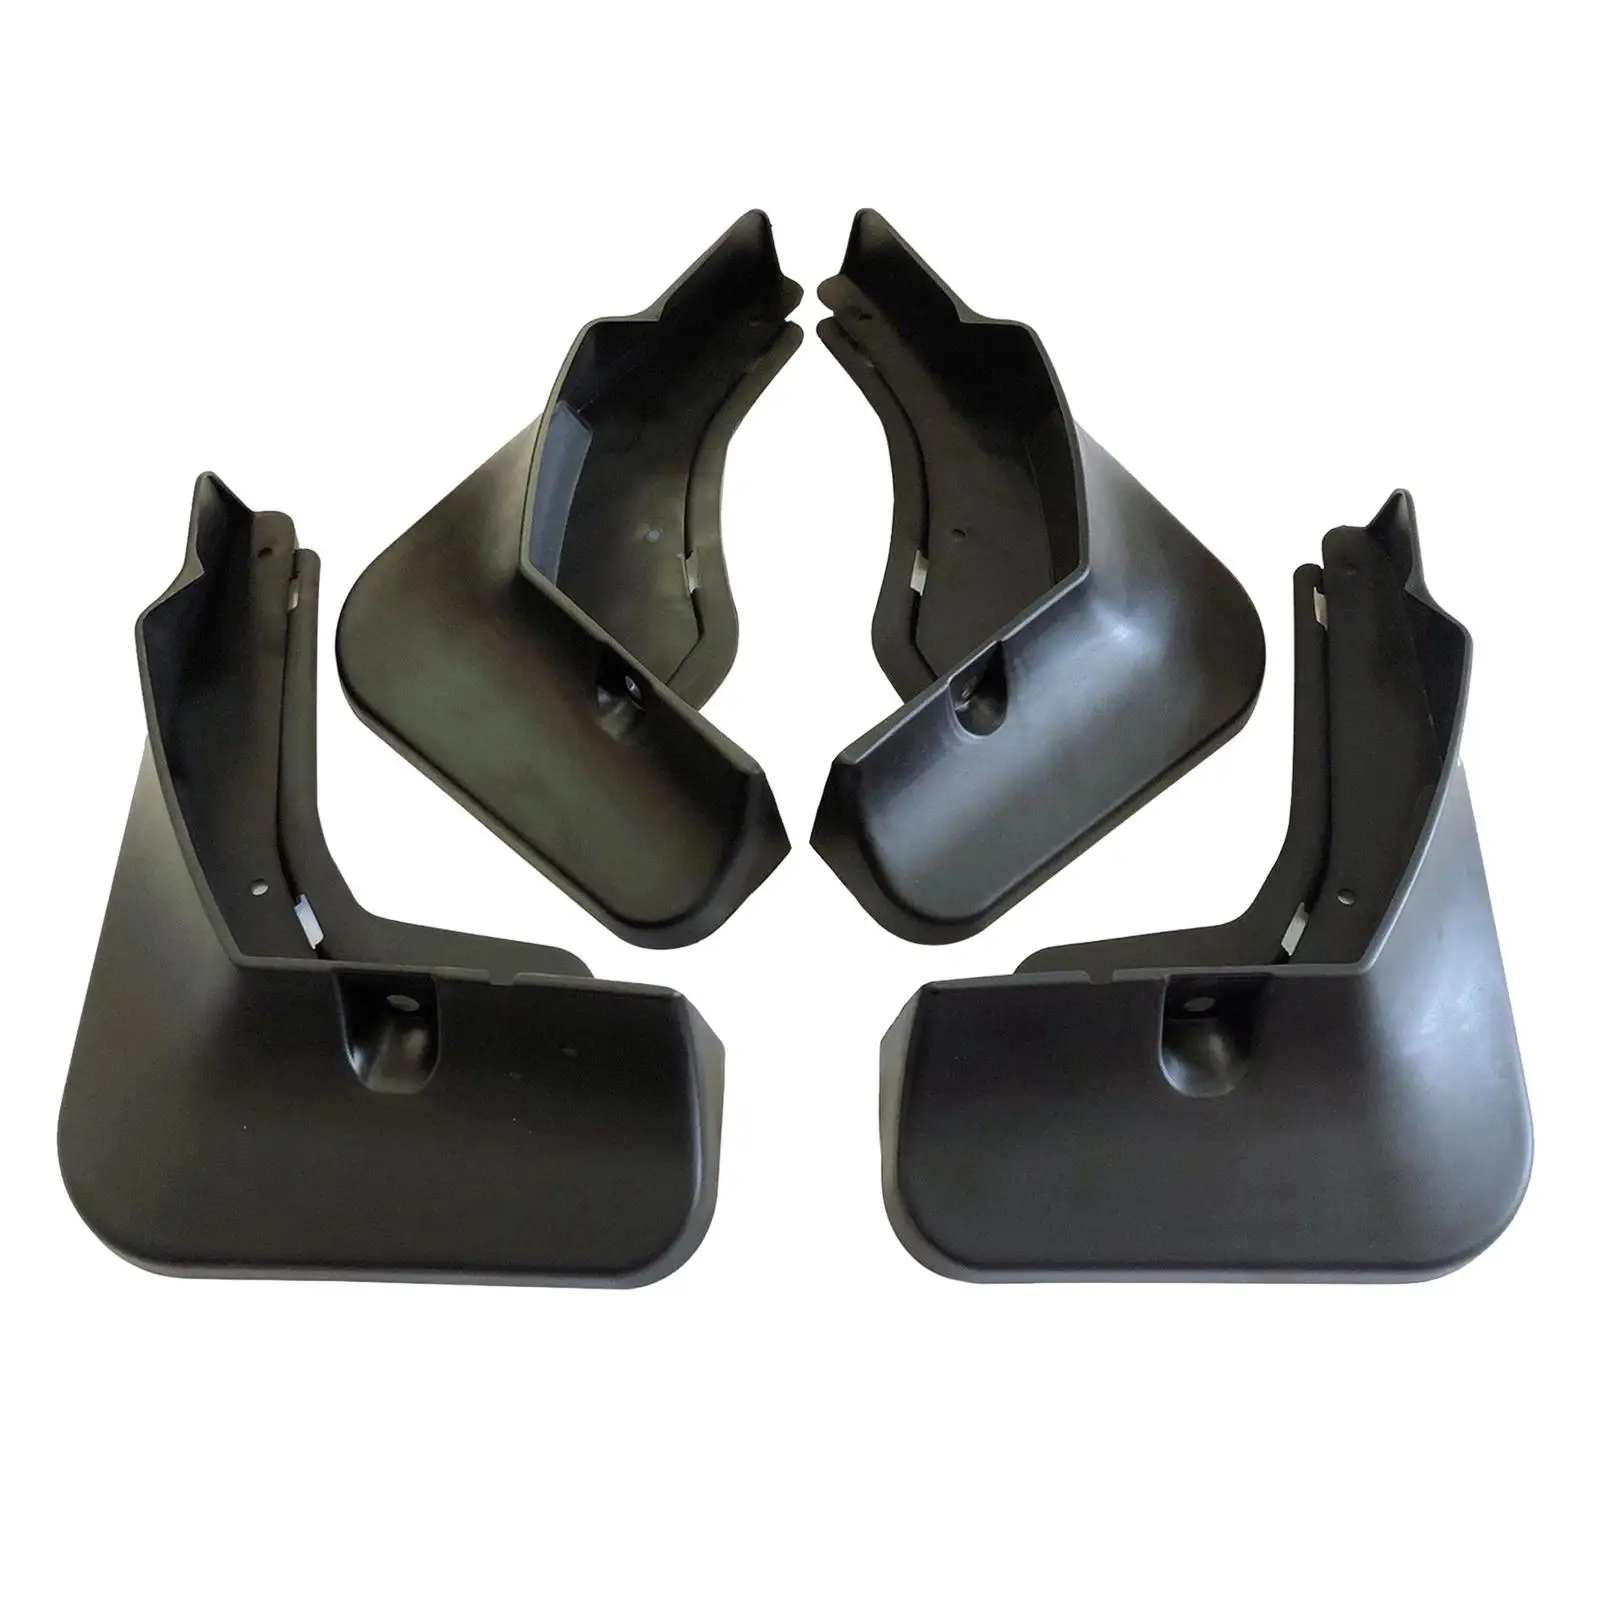 4x Car Mudguard Replaces Parts Accessory Mudflaps for Byd Song Plus Pro